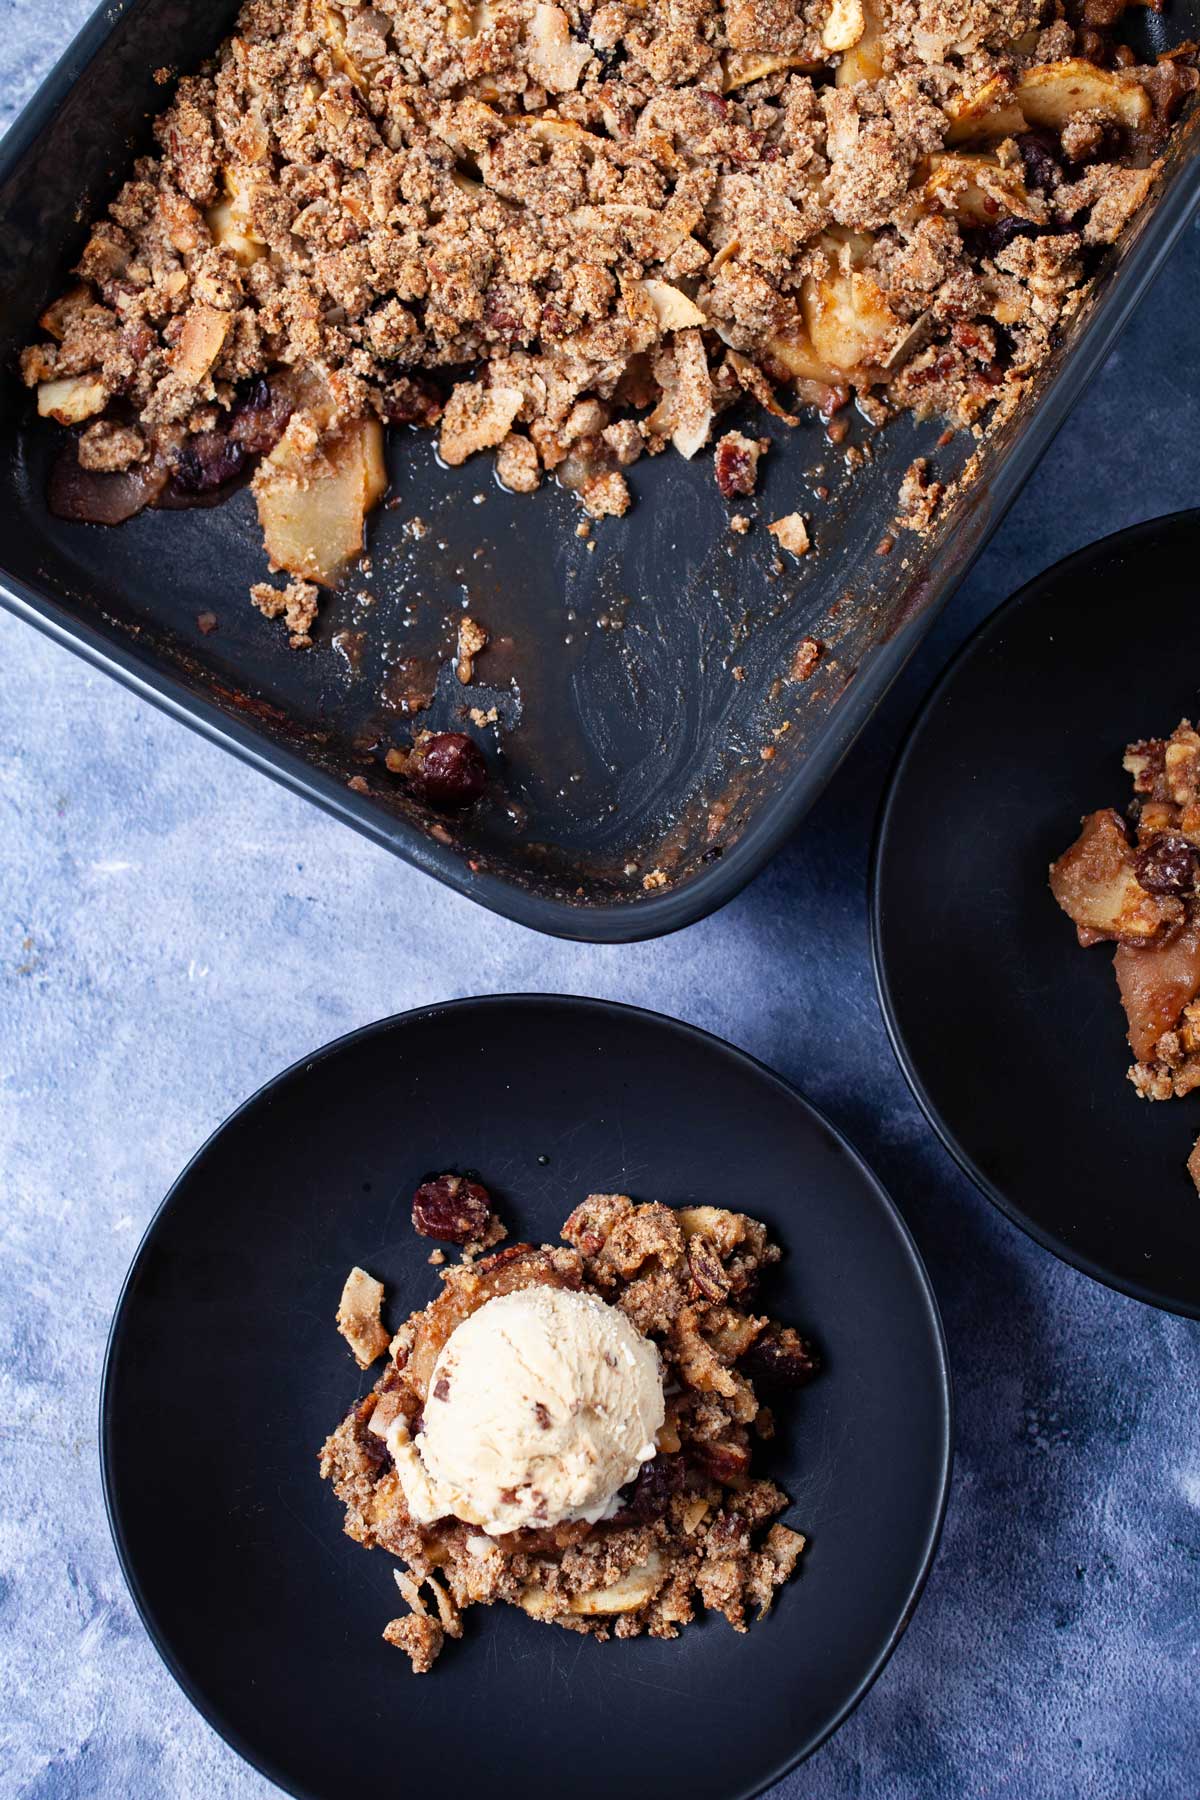 Healthy apple crumble served on a plate and topped with a scoop of ice cream next to a baking dish with the same apple crumble.